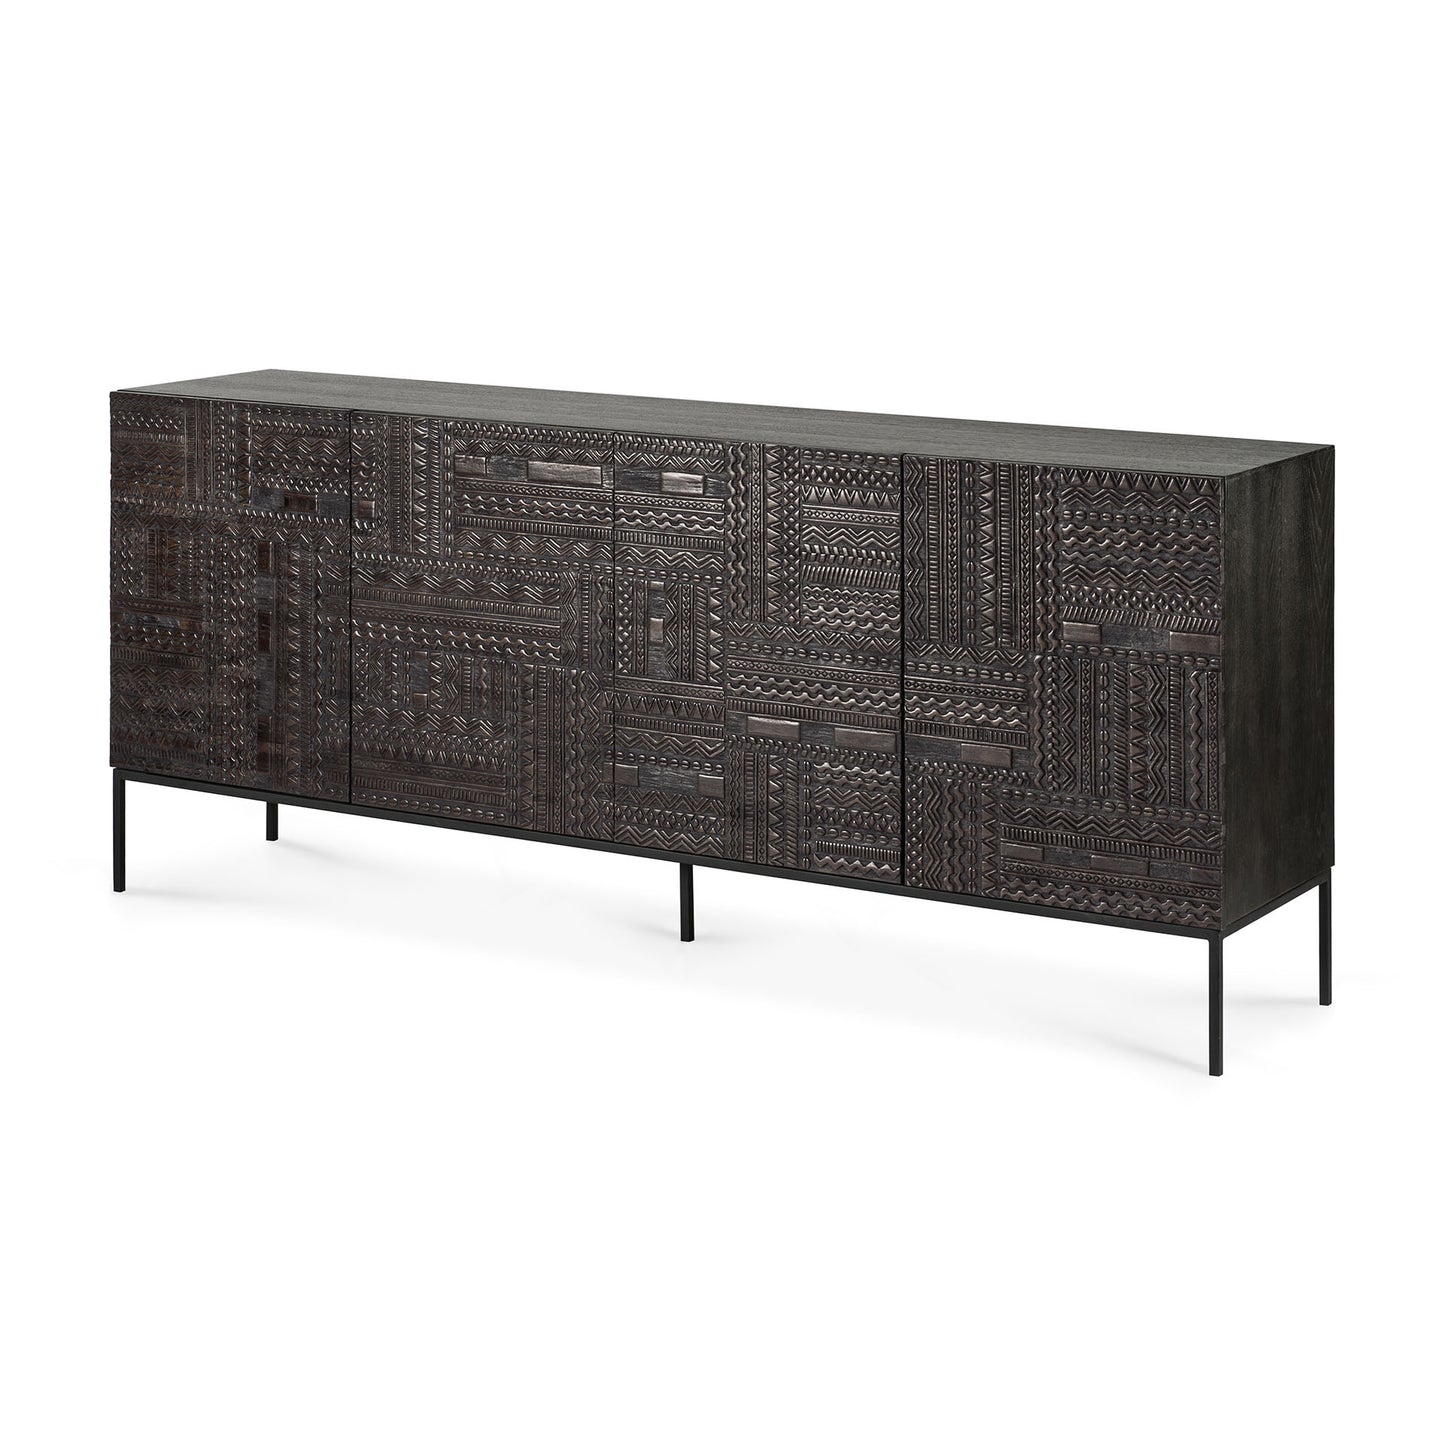 Ethnicraft Teak Ancestor Tabwa Sideboard Buffet is available from Make Your House A Home, Bendigo, Victoria, Australia